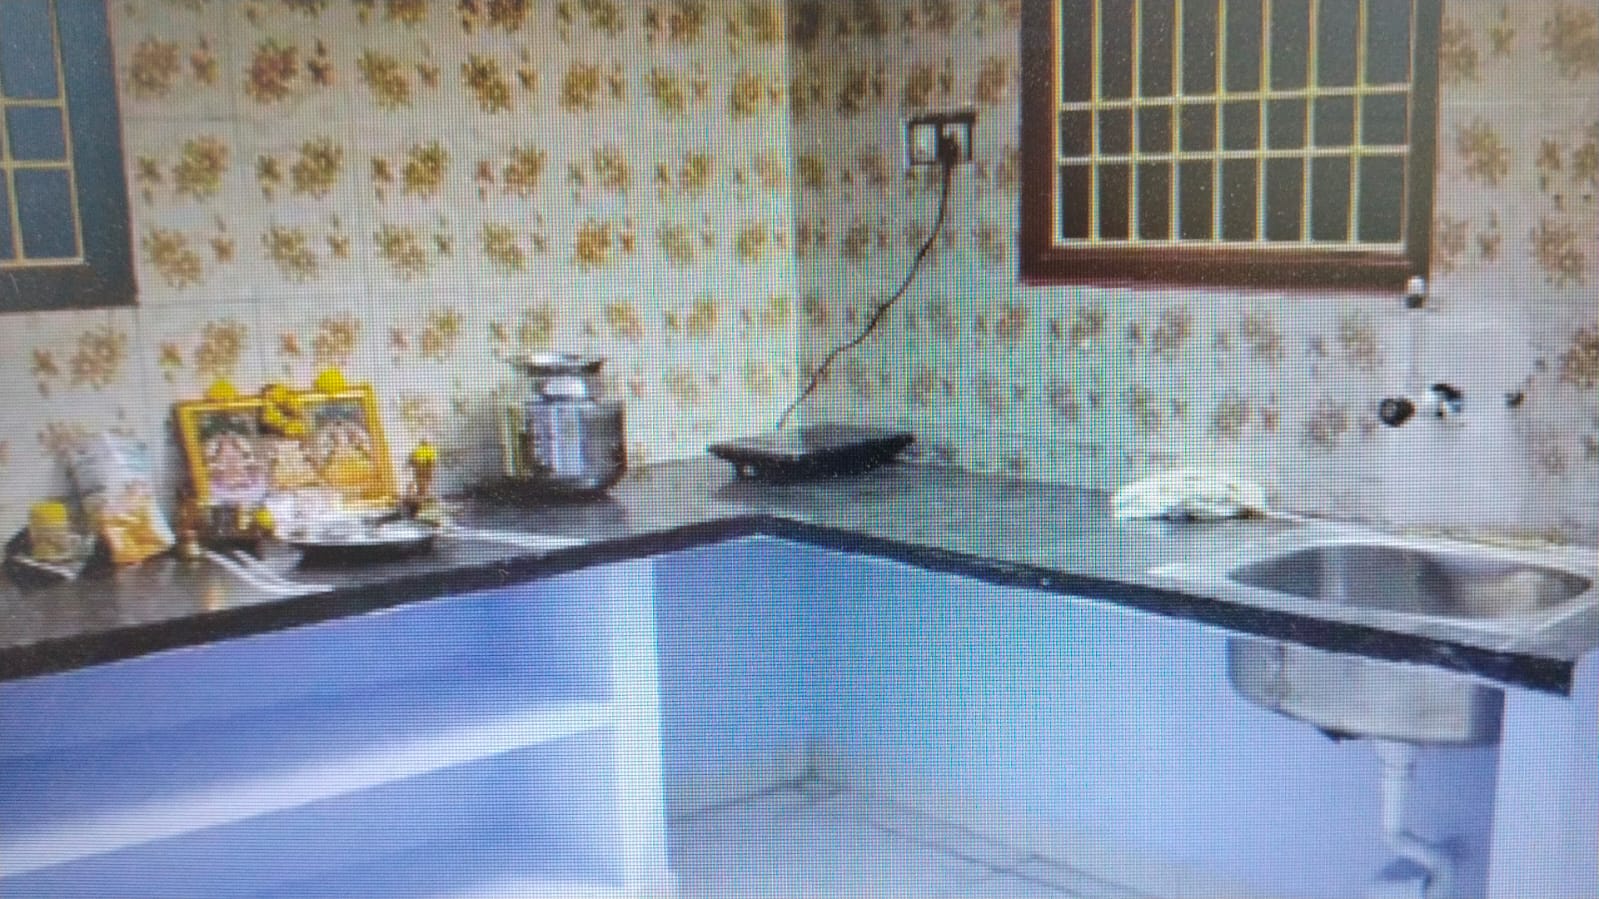 12045-for-rent-2BHK-Residential-House-Semi-Furnished-Monthly-rs-6200-in-Pondicherry-City-Reddiyarpalayam-Puducherry-Pondicherry